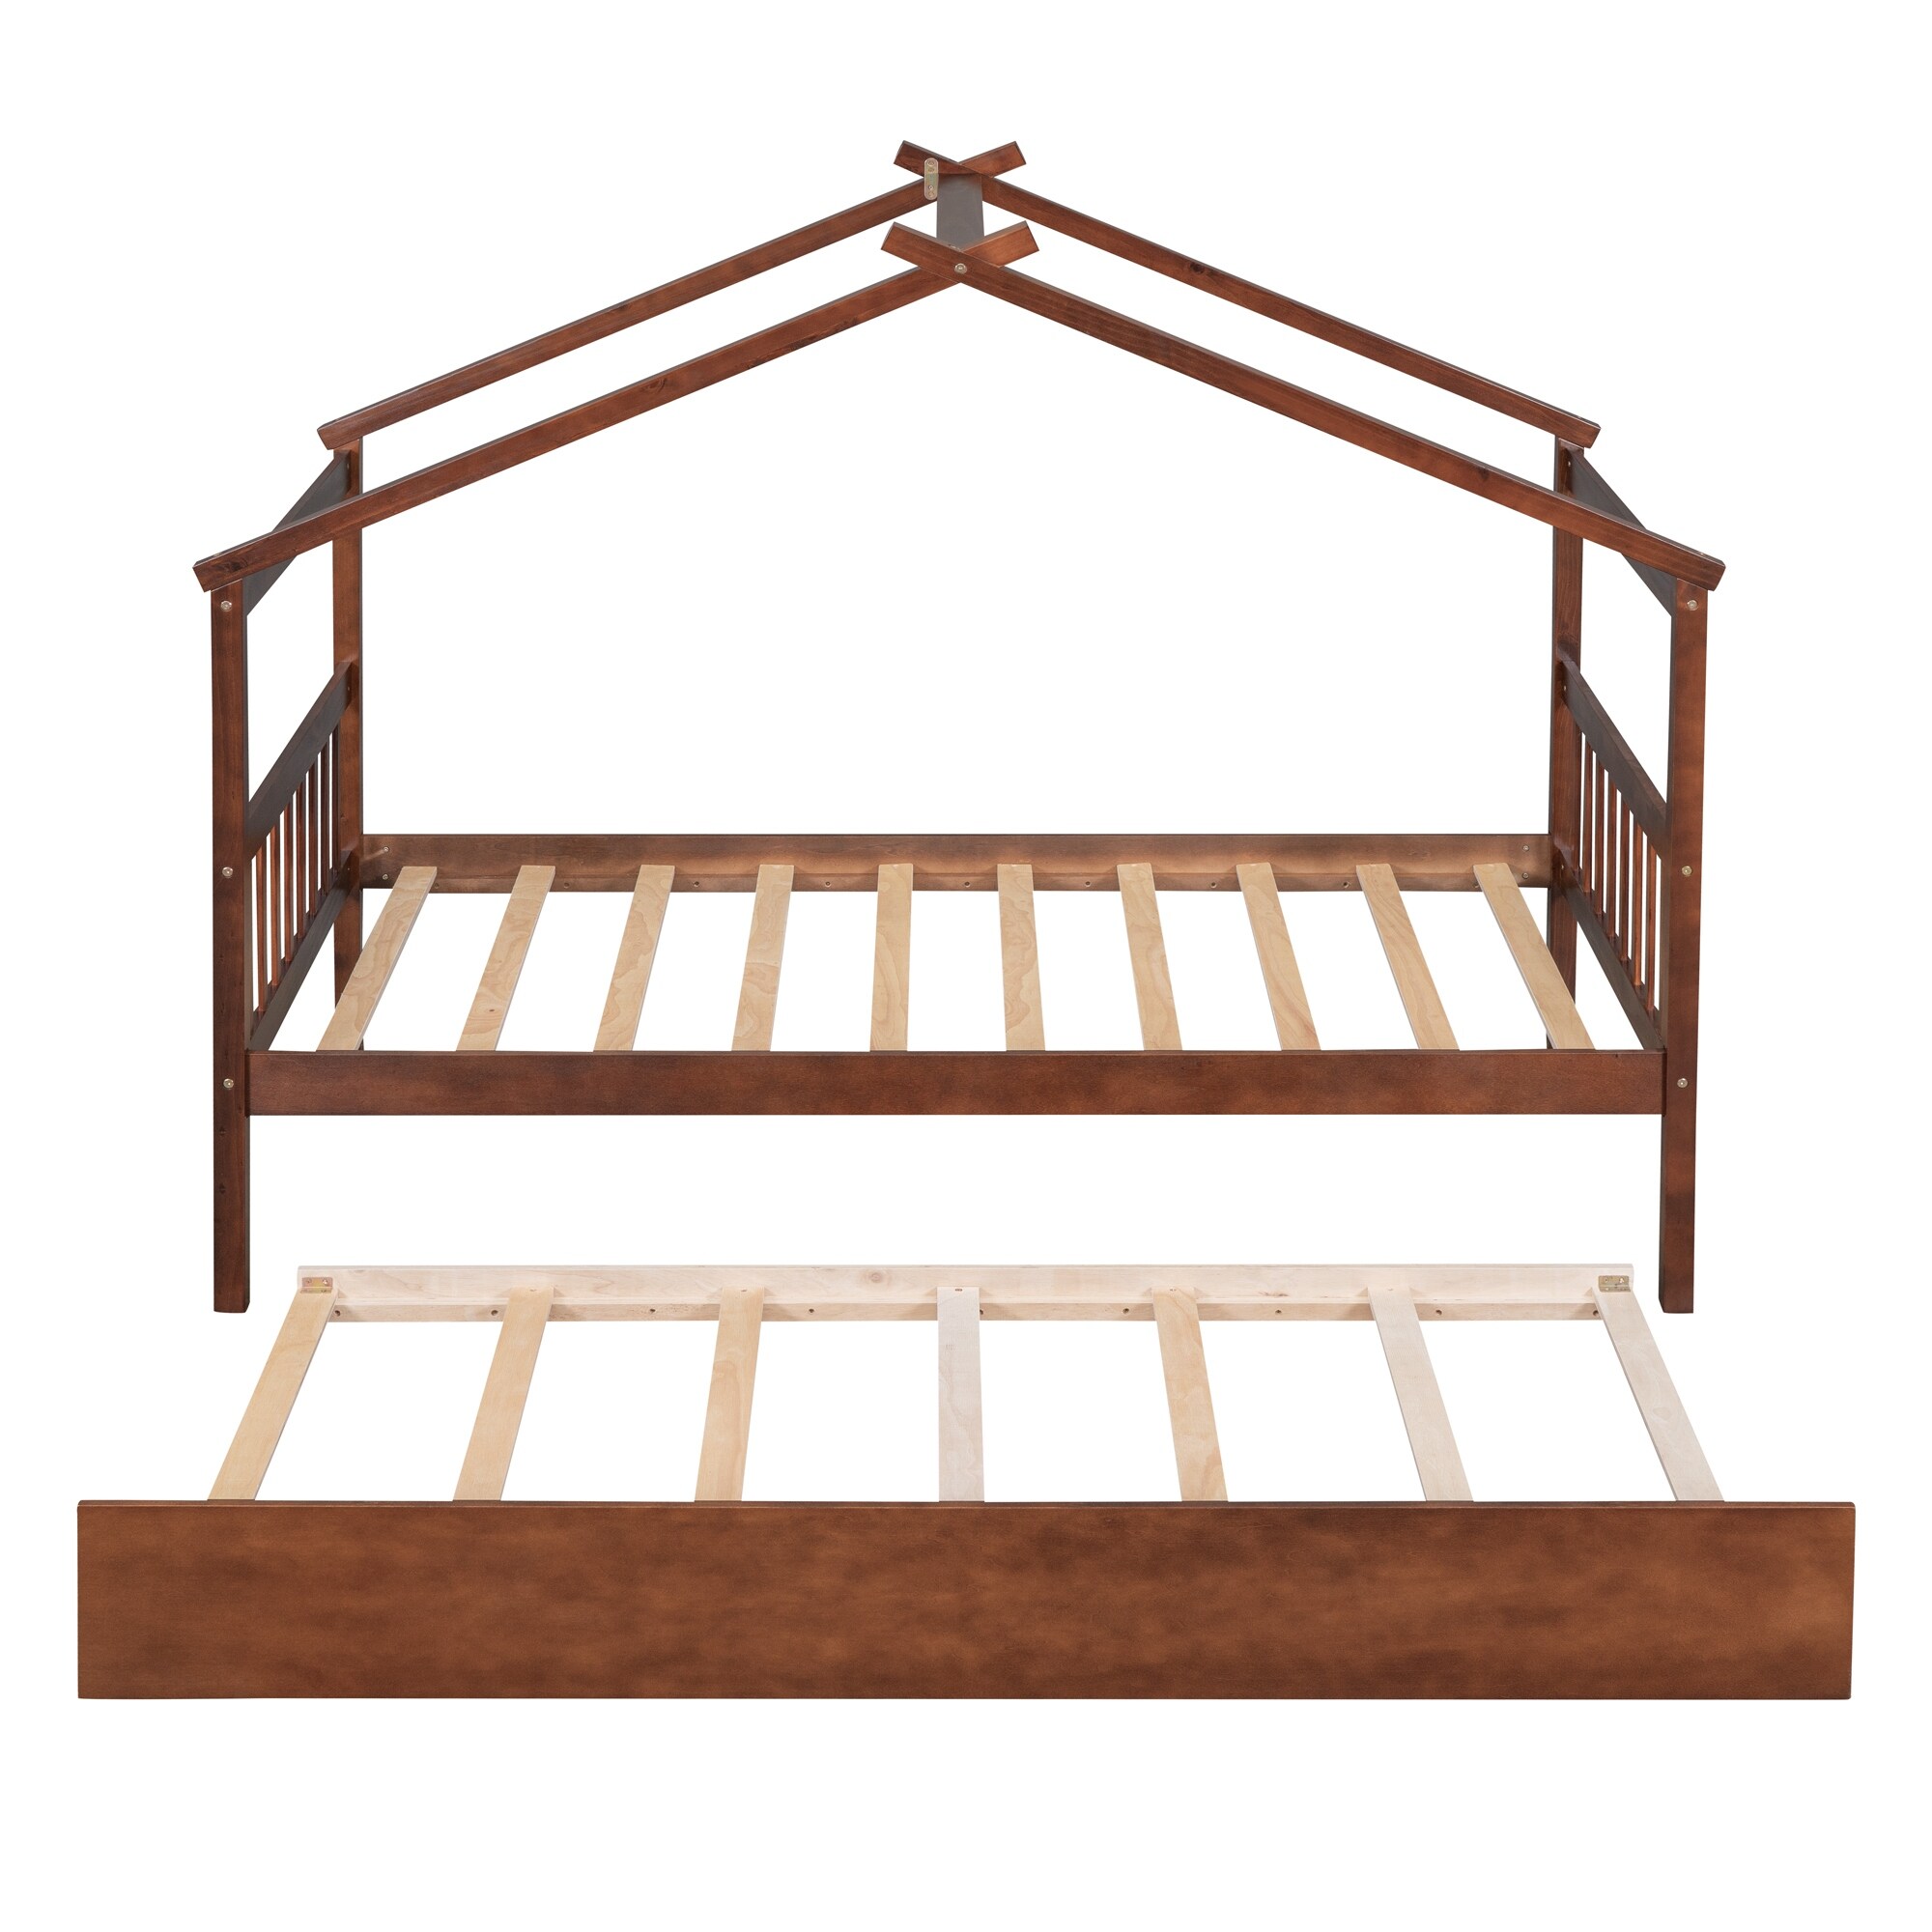 Walnut Whimsical House Bed, Twin Size Wooden House Bed with Trundle, Solid Pine Construction, Imaginative Design for Kids